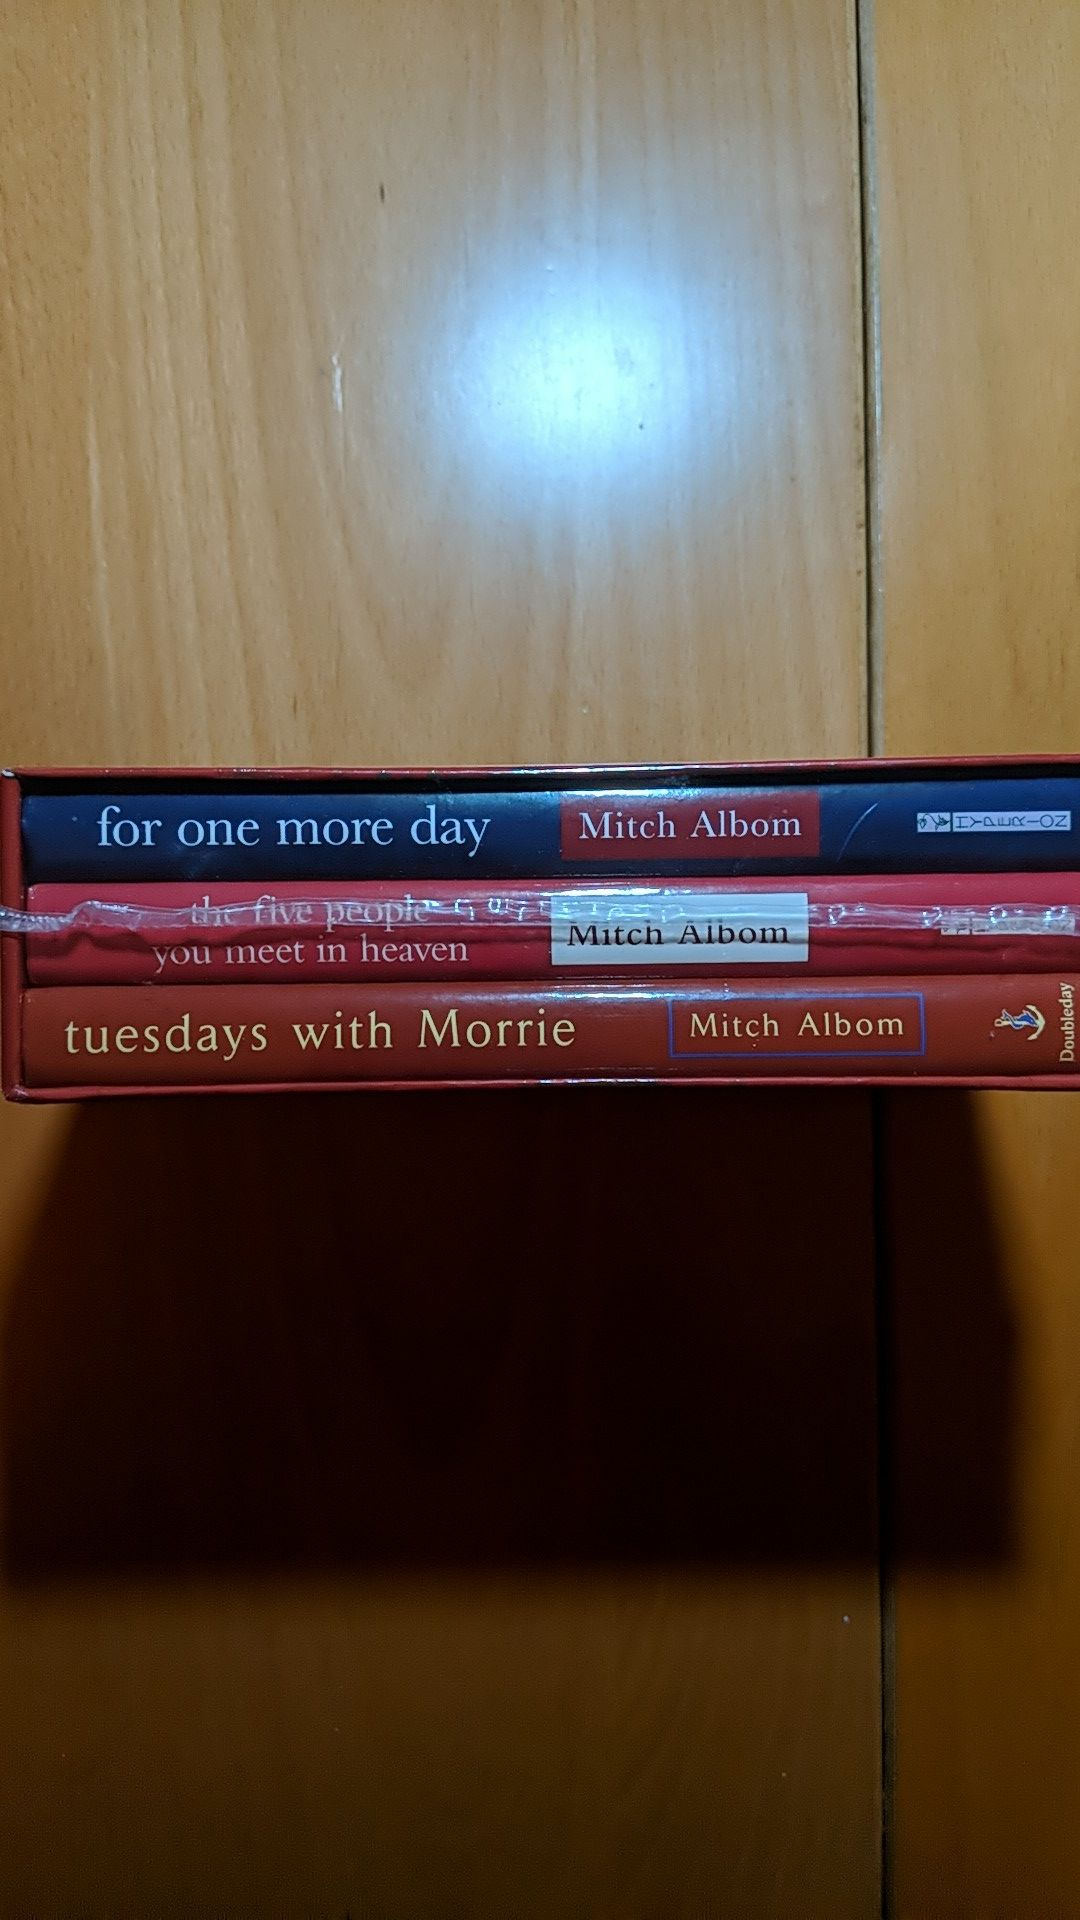 Mitch Albom Tuesdays With Morrie, For One More Day, The Five People You Meet in Heaven Box Set